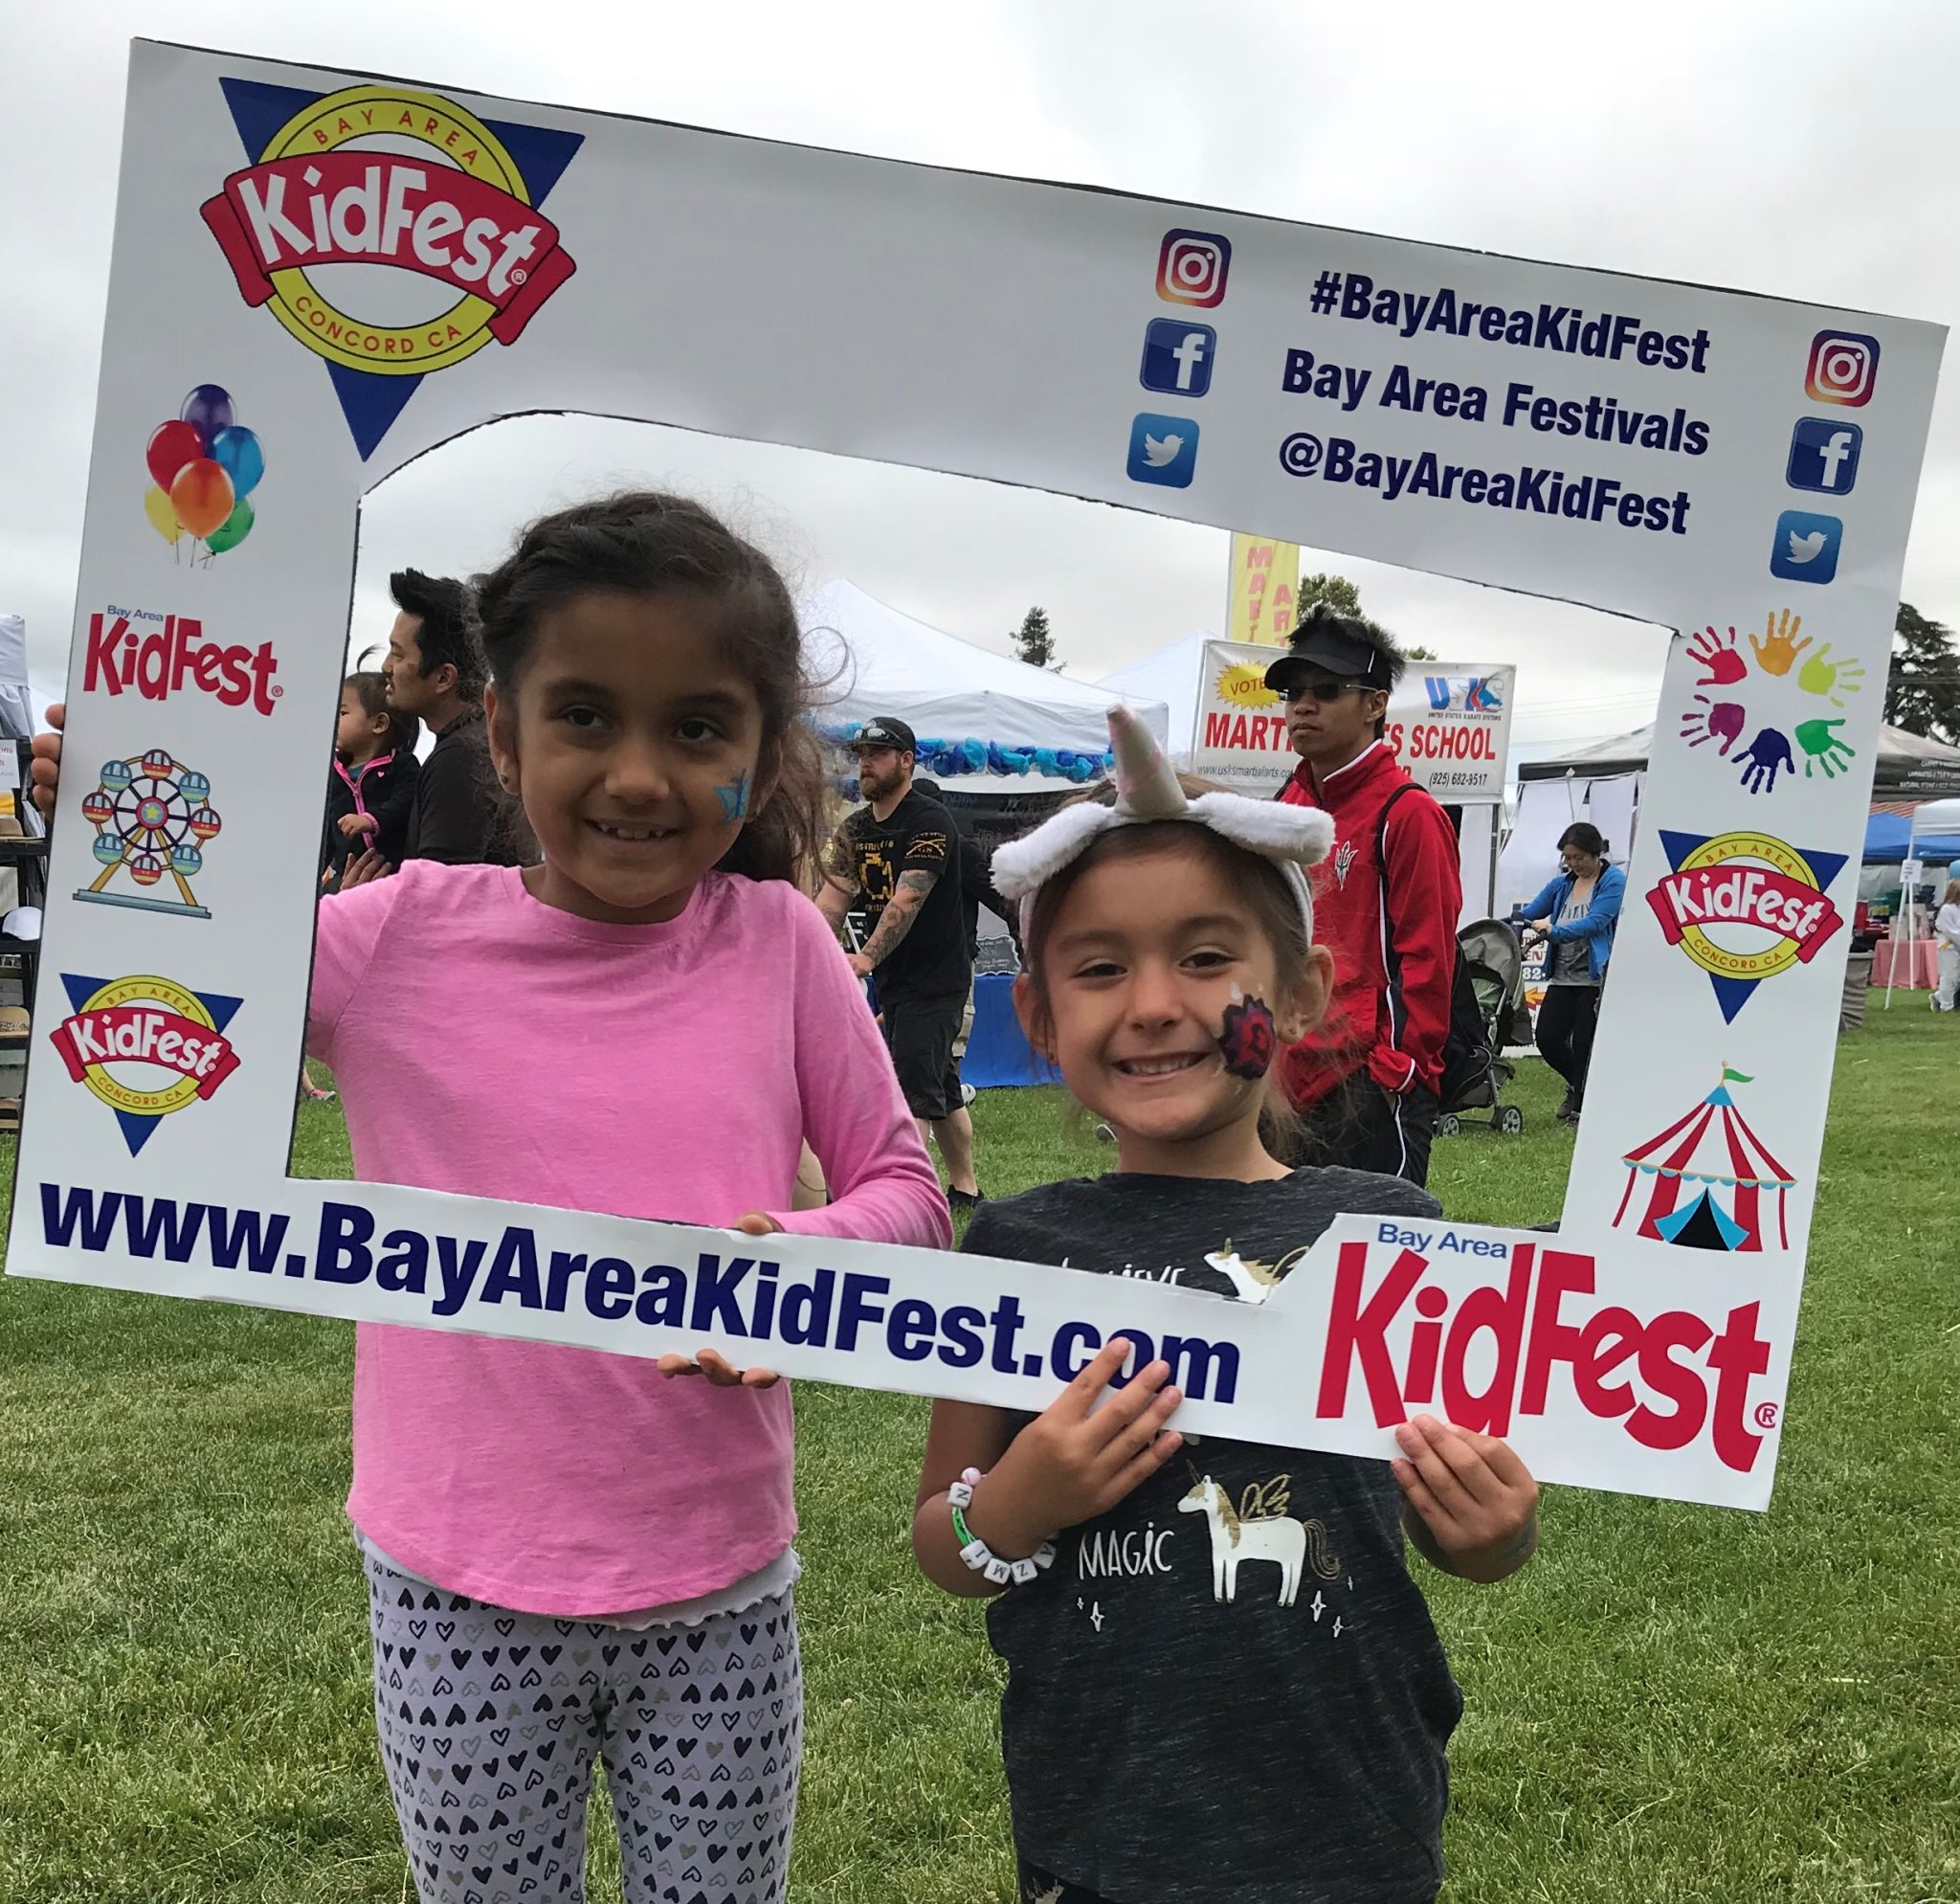 Bay Area KidFest finally is back in Concord On Memorial Day Weekend of